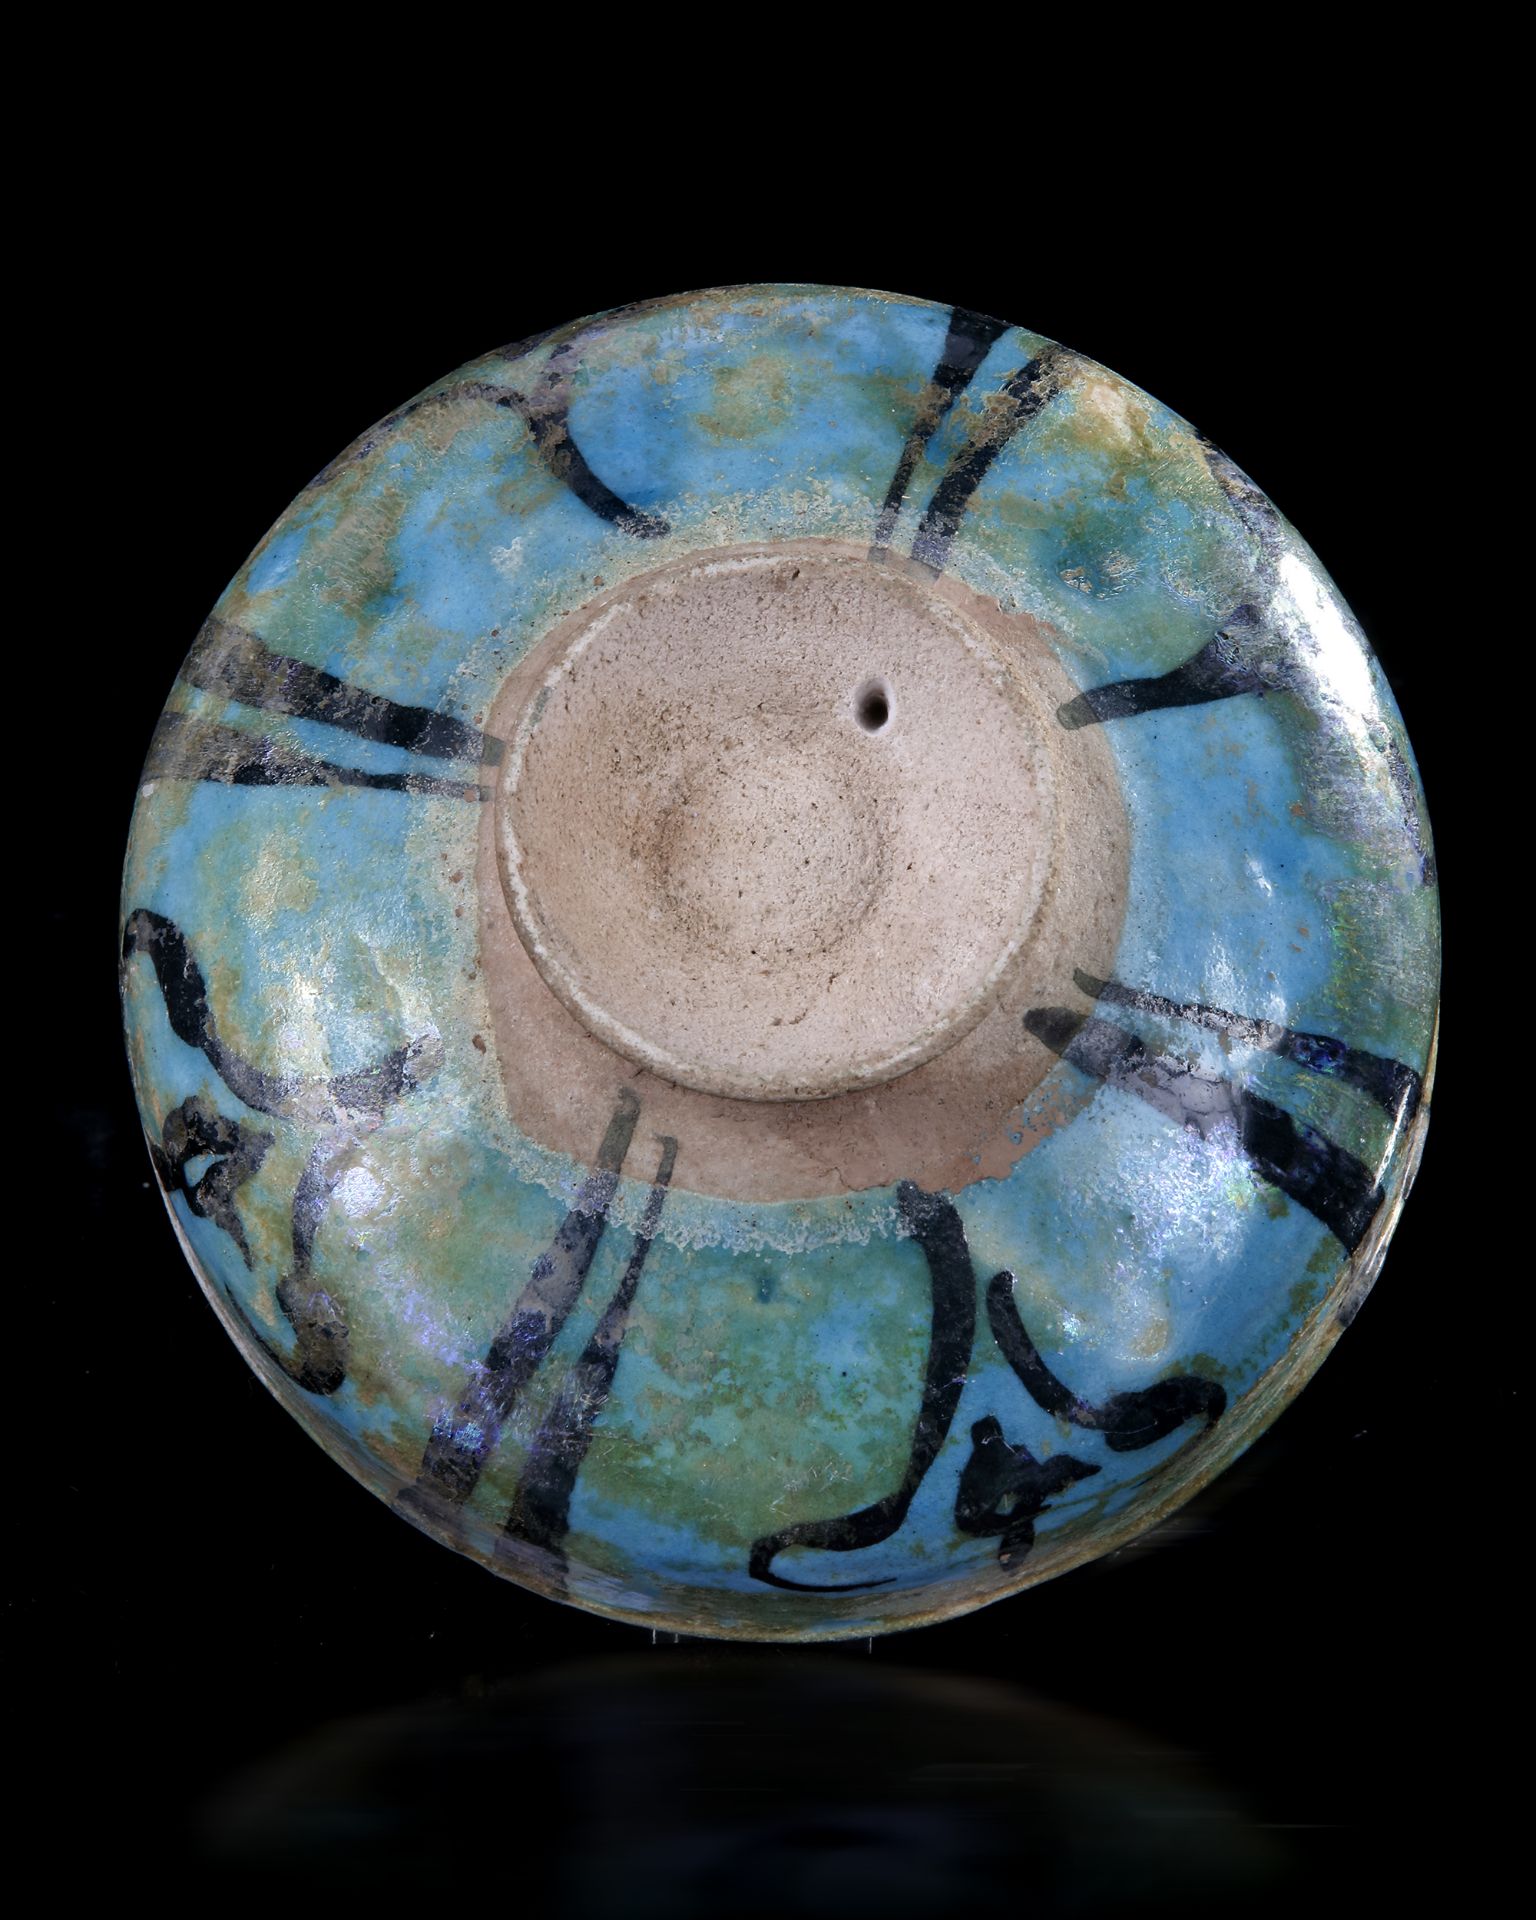 A KASHAN TURQUOISE AND BLACK DECORATED BOWL, PERSIA, 13TH CENTURY - Image 4 of 4